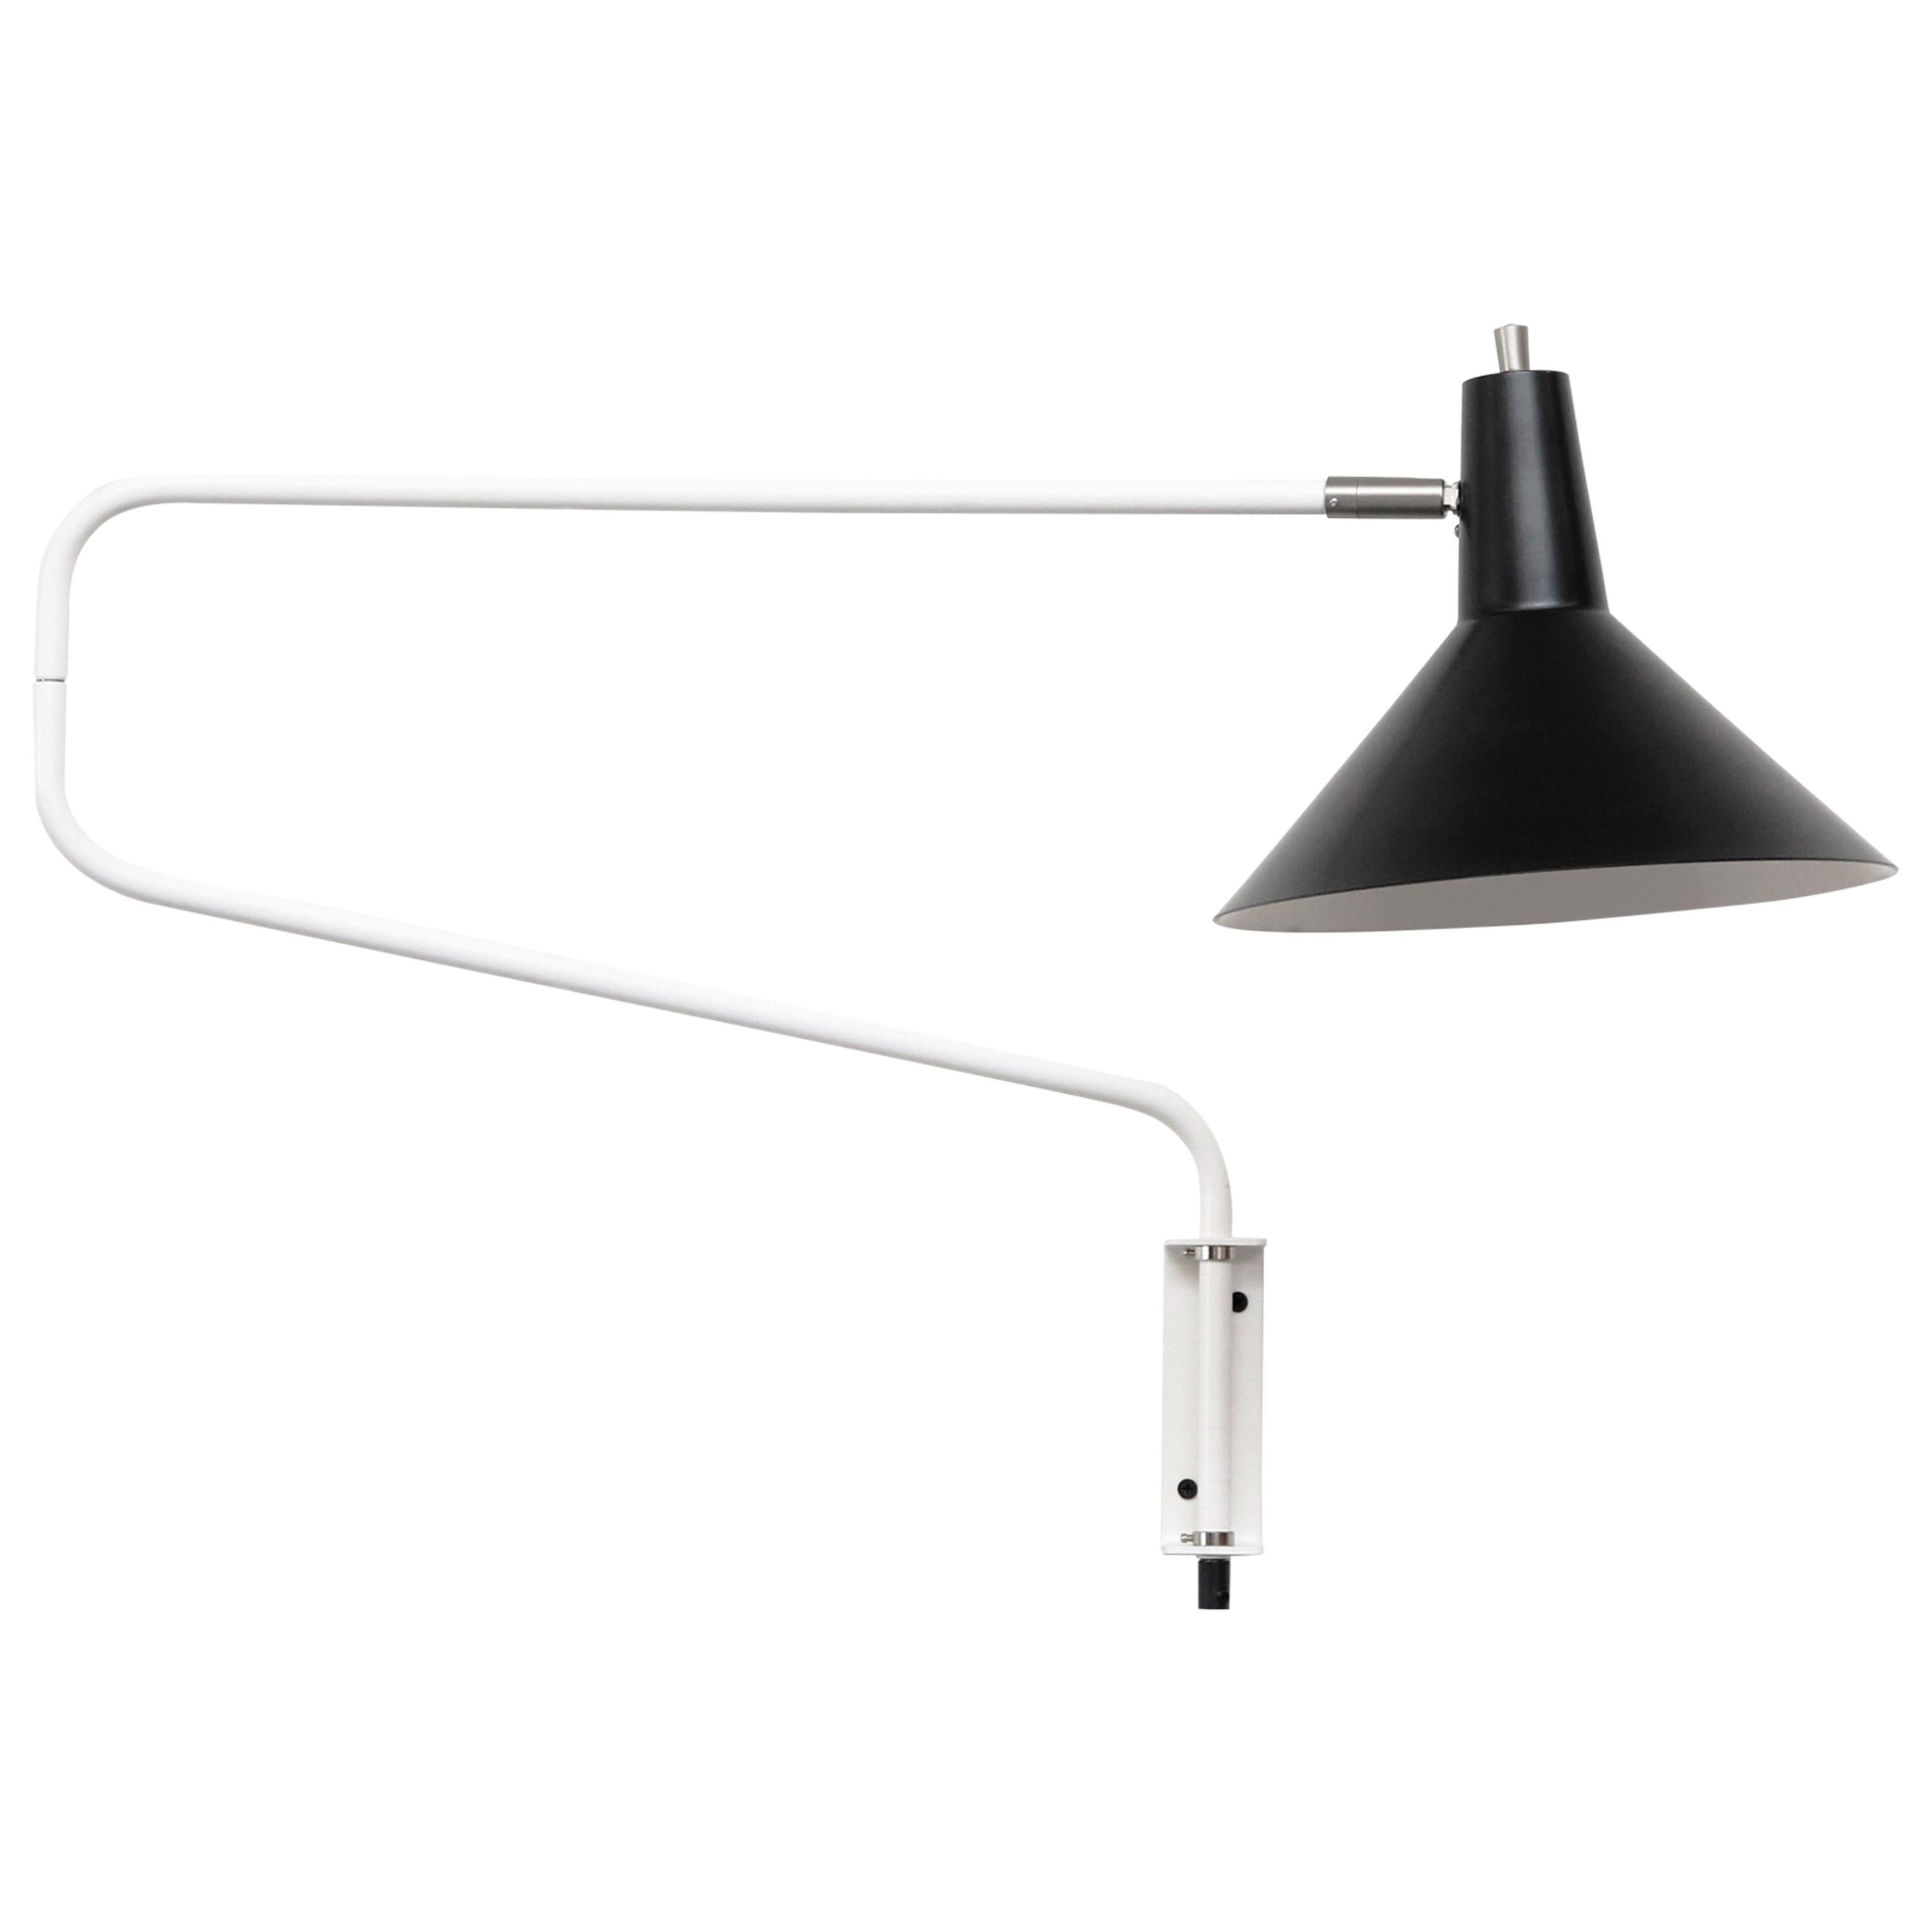 Anvia 'The Paper Clip' Swinging Wall Lamp in Black & White by Jan Hoogervorst For Sale